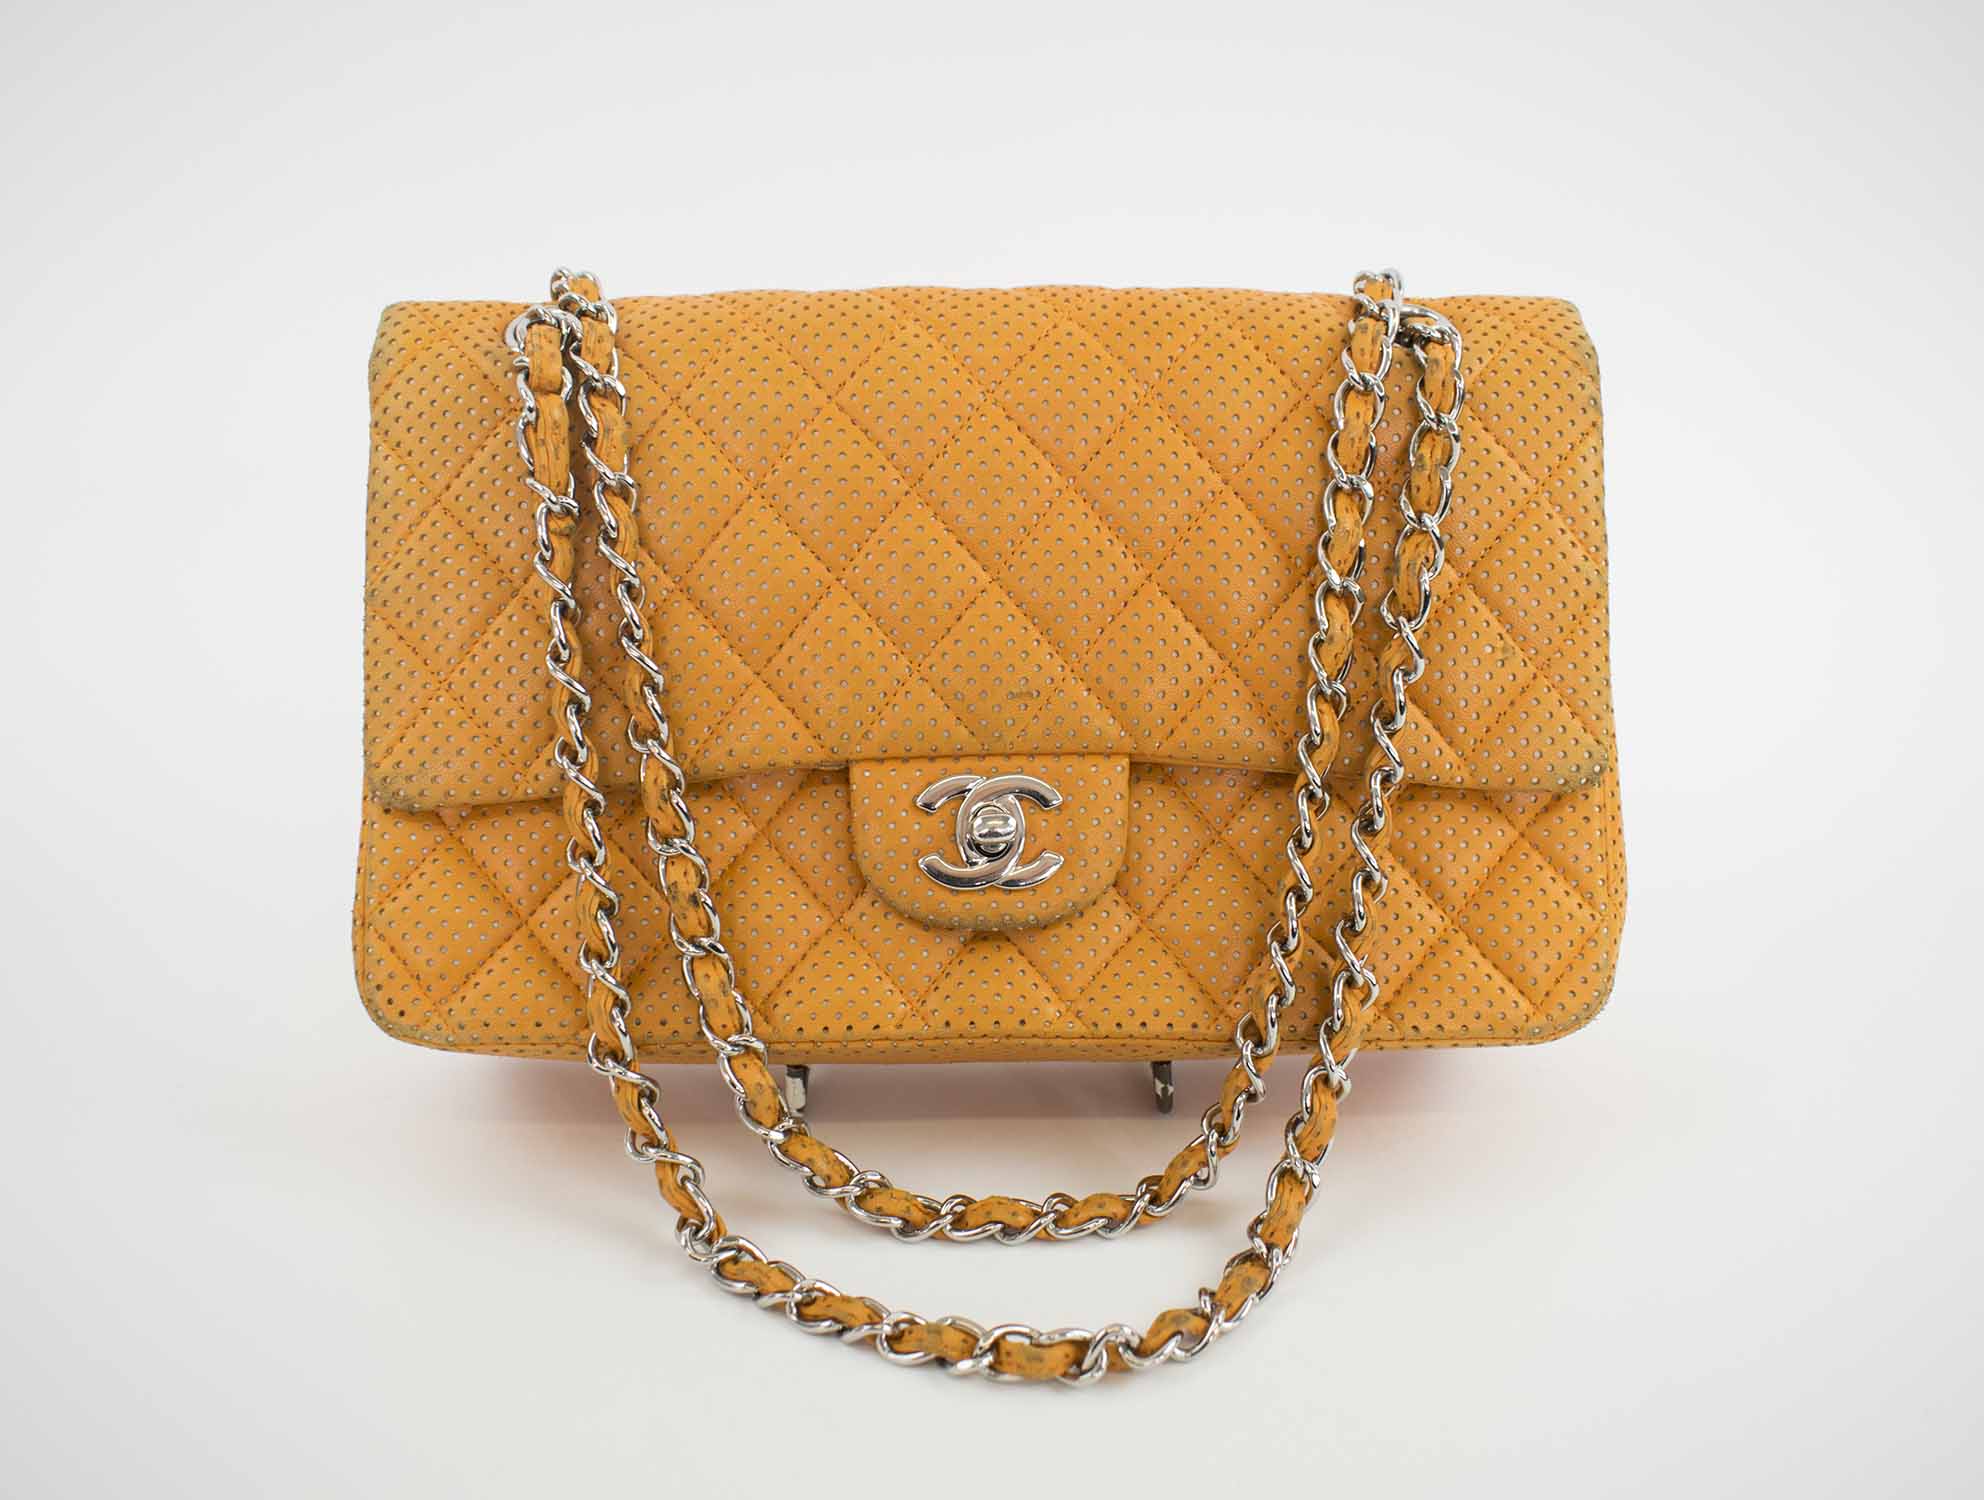 Chanel - Perforated Leather Flap Bag